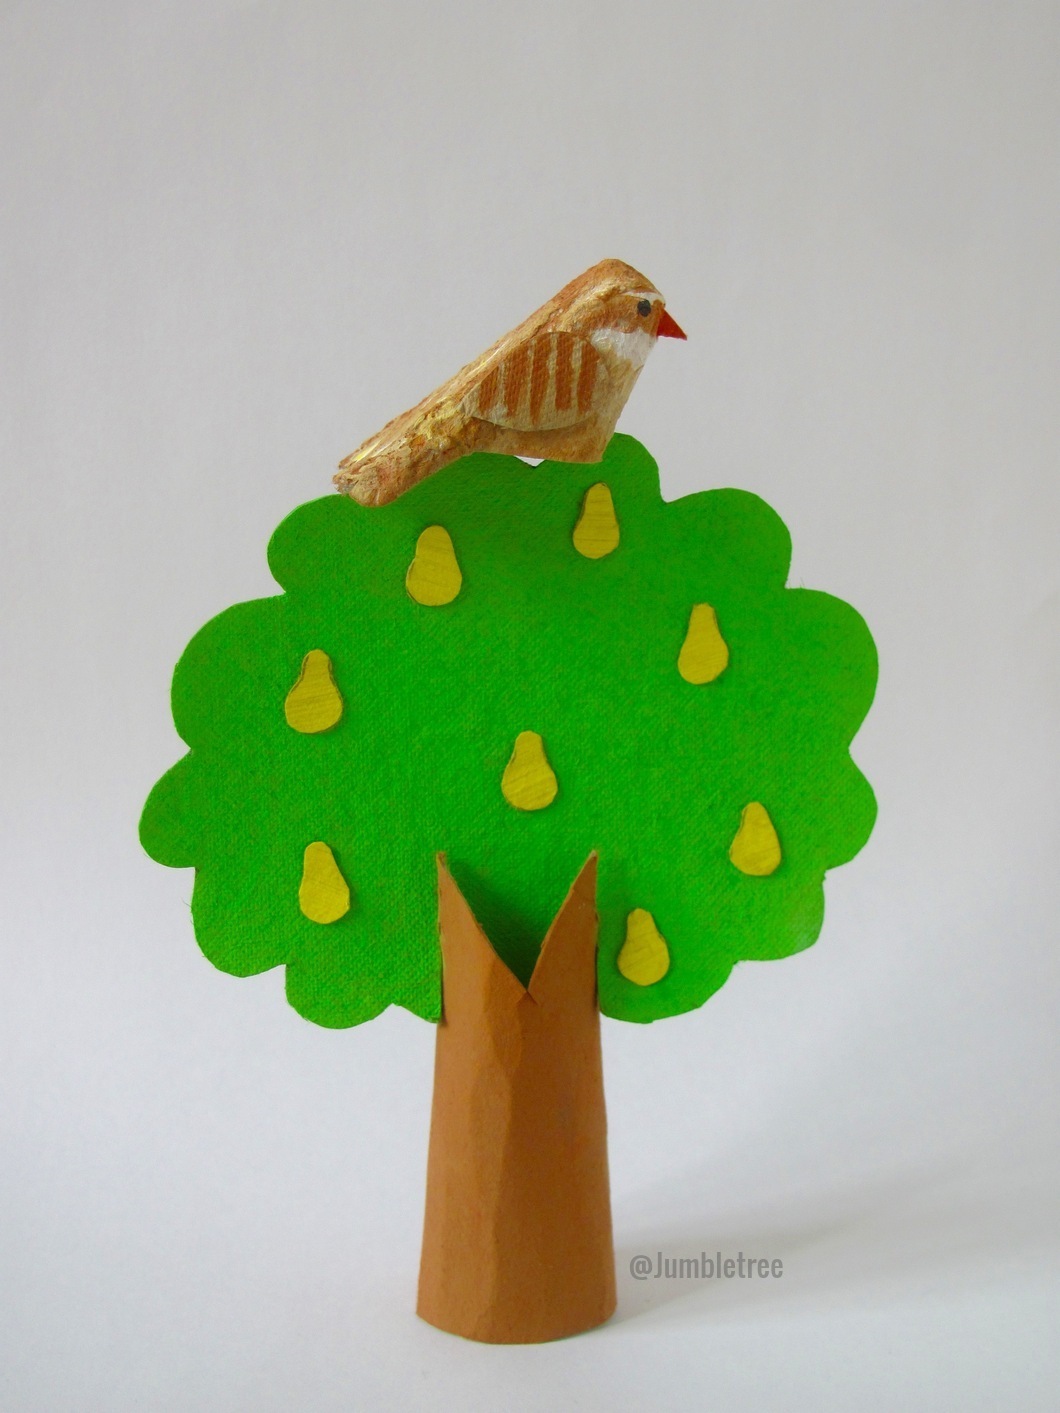 Craft of a bird in a tree made of paper